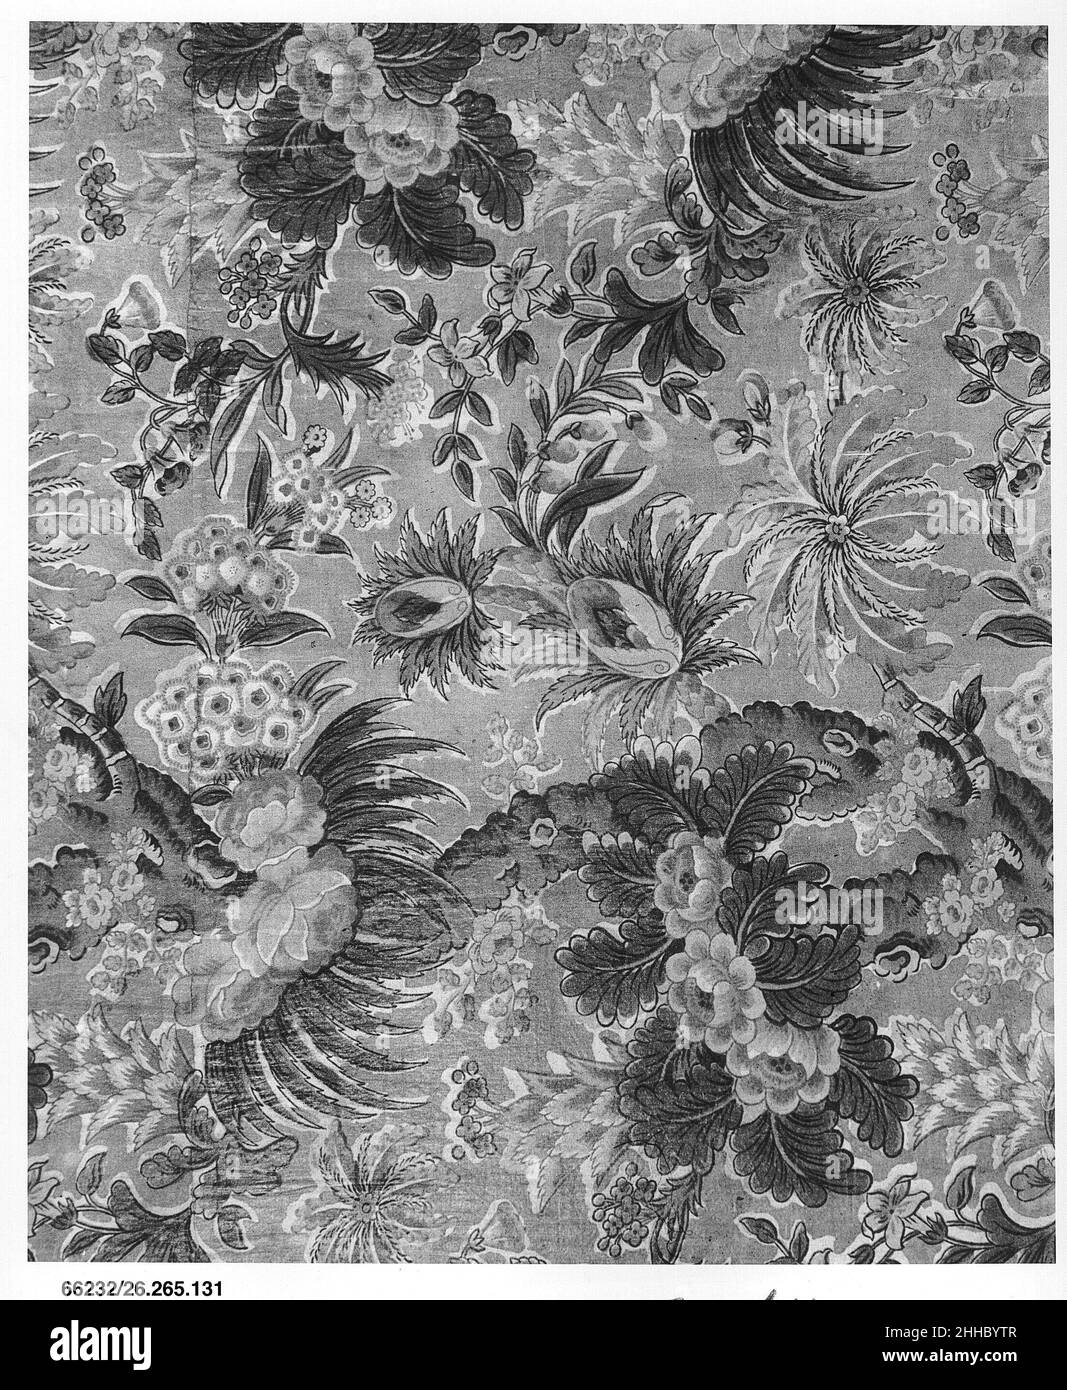 Floral print ca. 1815 Bannister Hall The Bannister Hall print works was founded ca. 1798 by Richard Jackson and John Stephenson. Between 1809 and 1825 it was owned by Charles Swainson with varying partners. It was the leading firm for woodblock 'furniture' chintzes.. Floral print  222030 Stock Photo